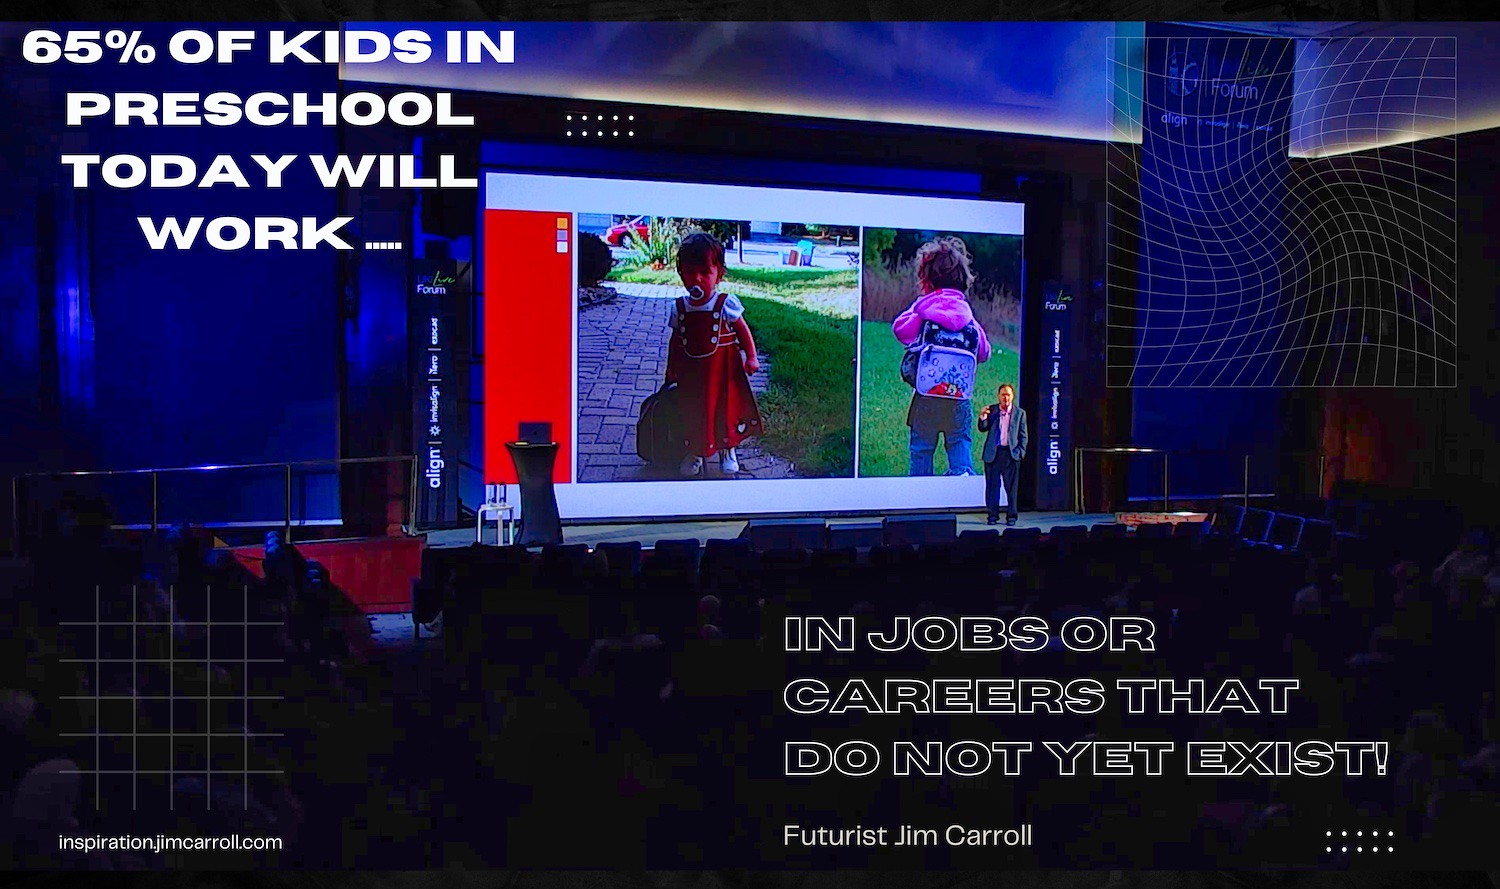 "65% of kids in preschool today will work in jobs or careers that do not yet exist!" - Futurist Jim Carroll